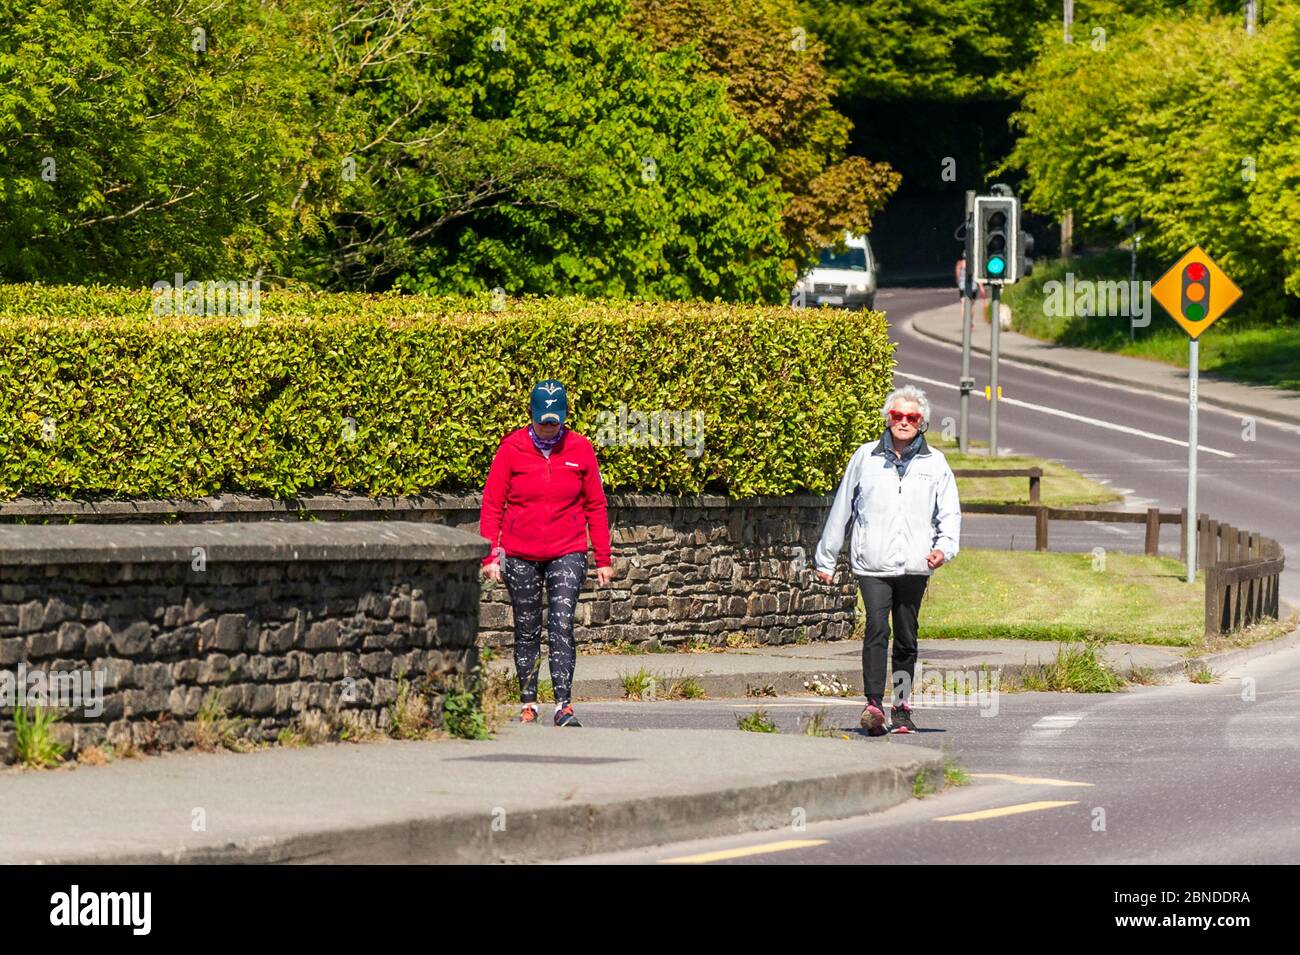 Clonakilty, West Cork, Ireland. 14th May, 2020. Two women walk in Clonakilty this afternoon, appearing to abide with social distancing guidelines set down by the government due to the Covid-19 pandemic. Credit: AG News/Alamy Live News Stock Photo